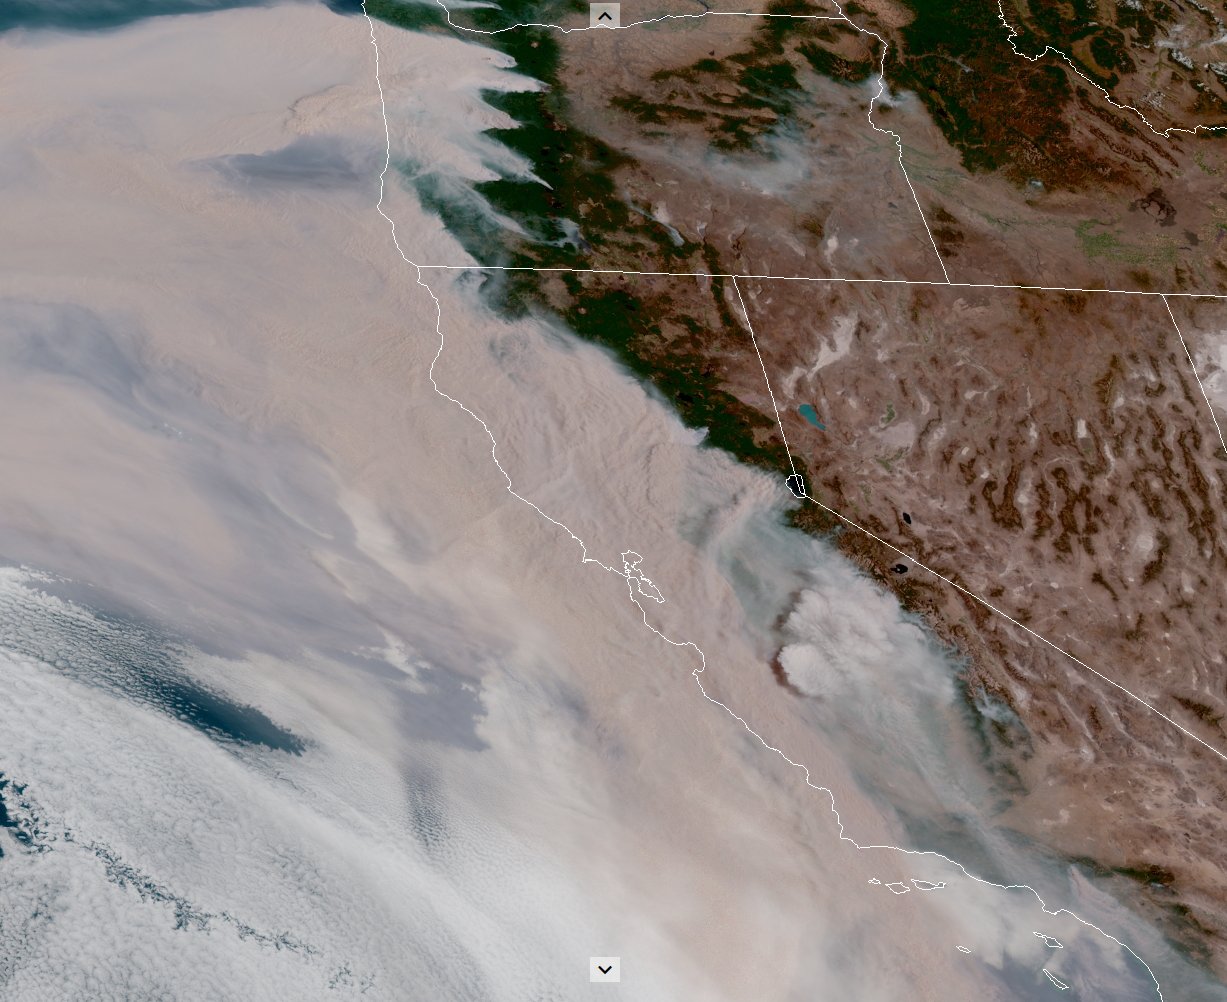 Satellite view of smoke plumes produced by 2020 California wildfires, September 9, 2020, 11:00 AM, taken from the GOES-17 weather satellite